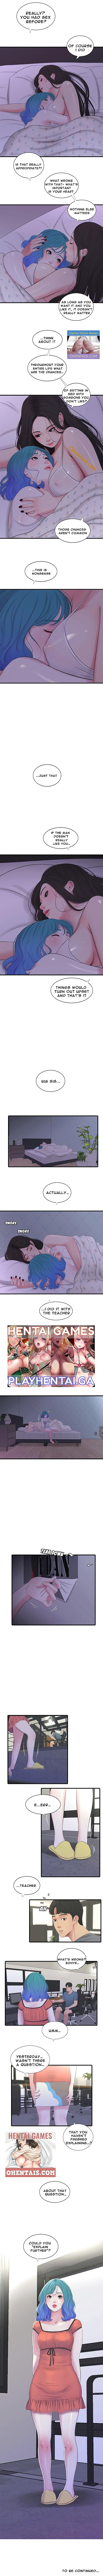 english manga Maidens In-Law - Ones In-Laws Virgins.., blowjob , full color  hentai